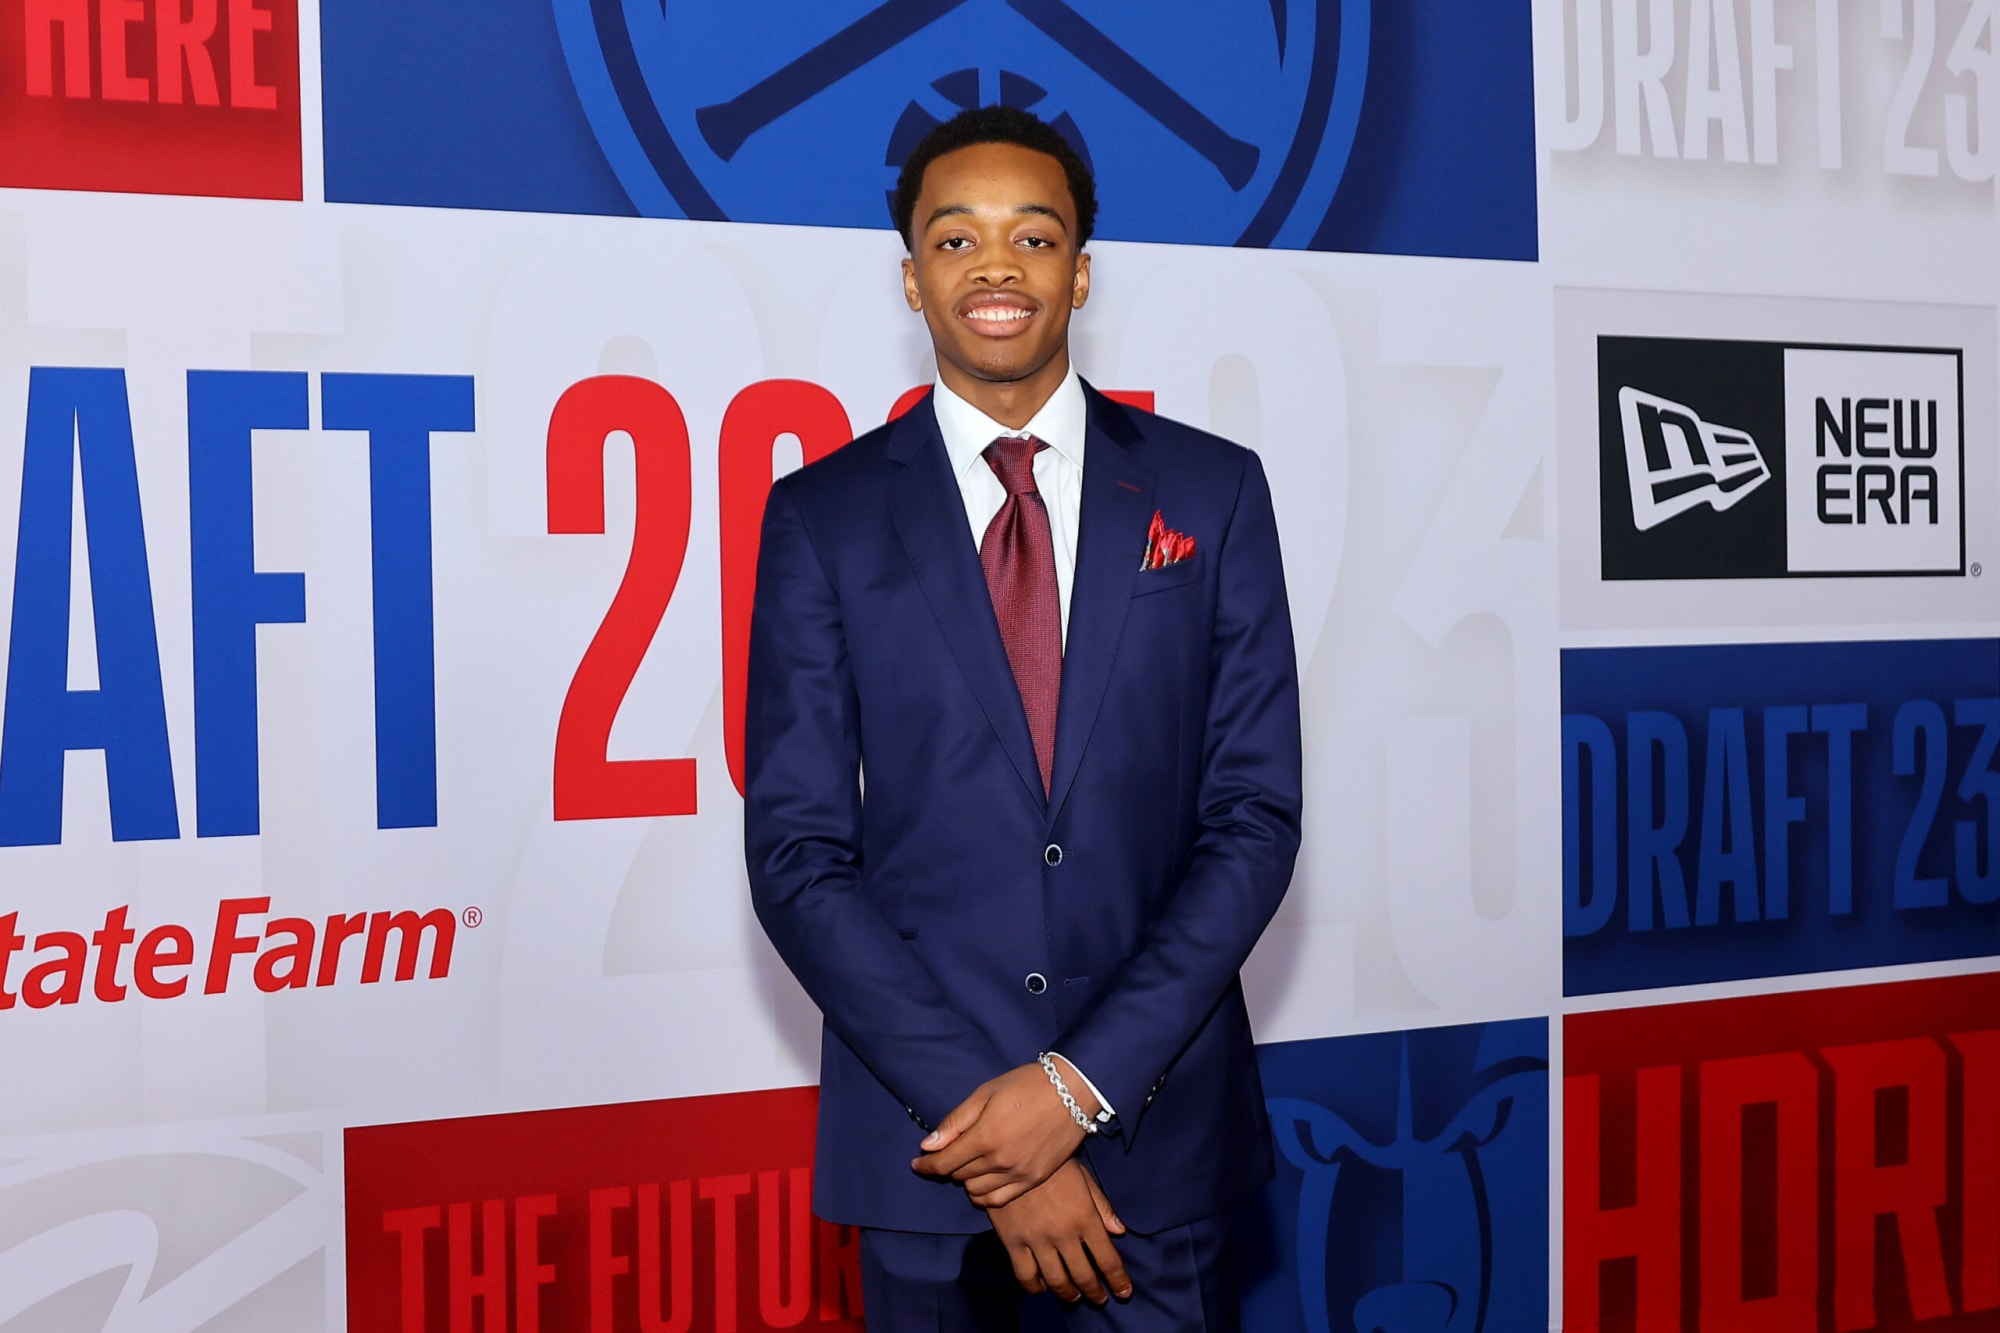 Grading The Best And Worst Suits From The 2023 NBA Draft